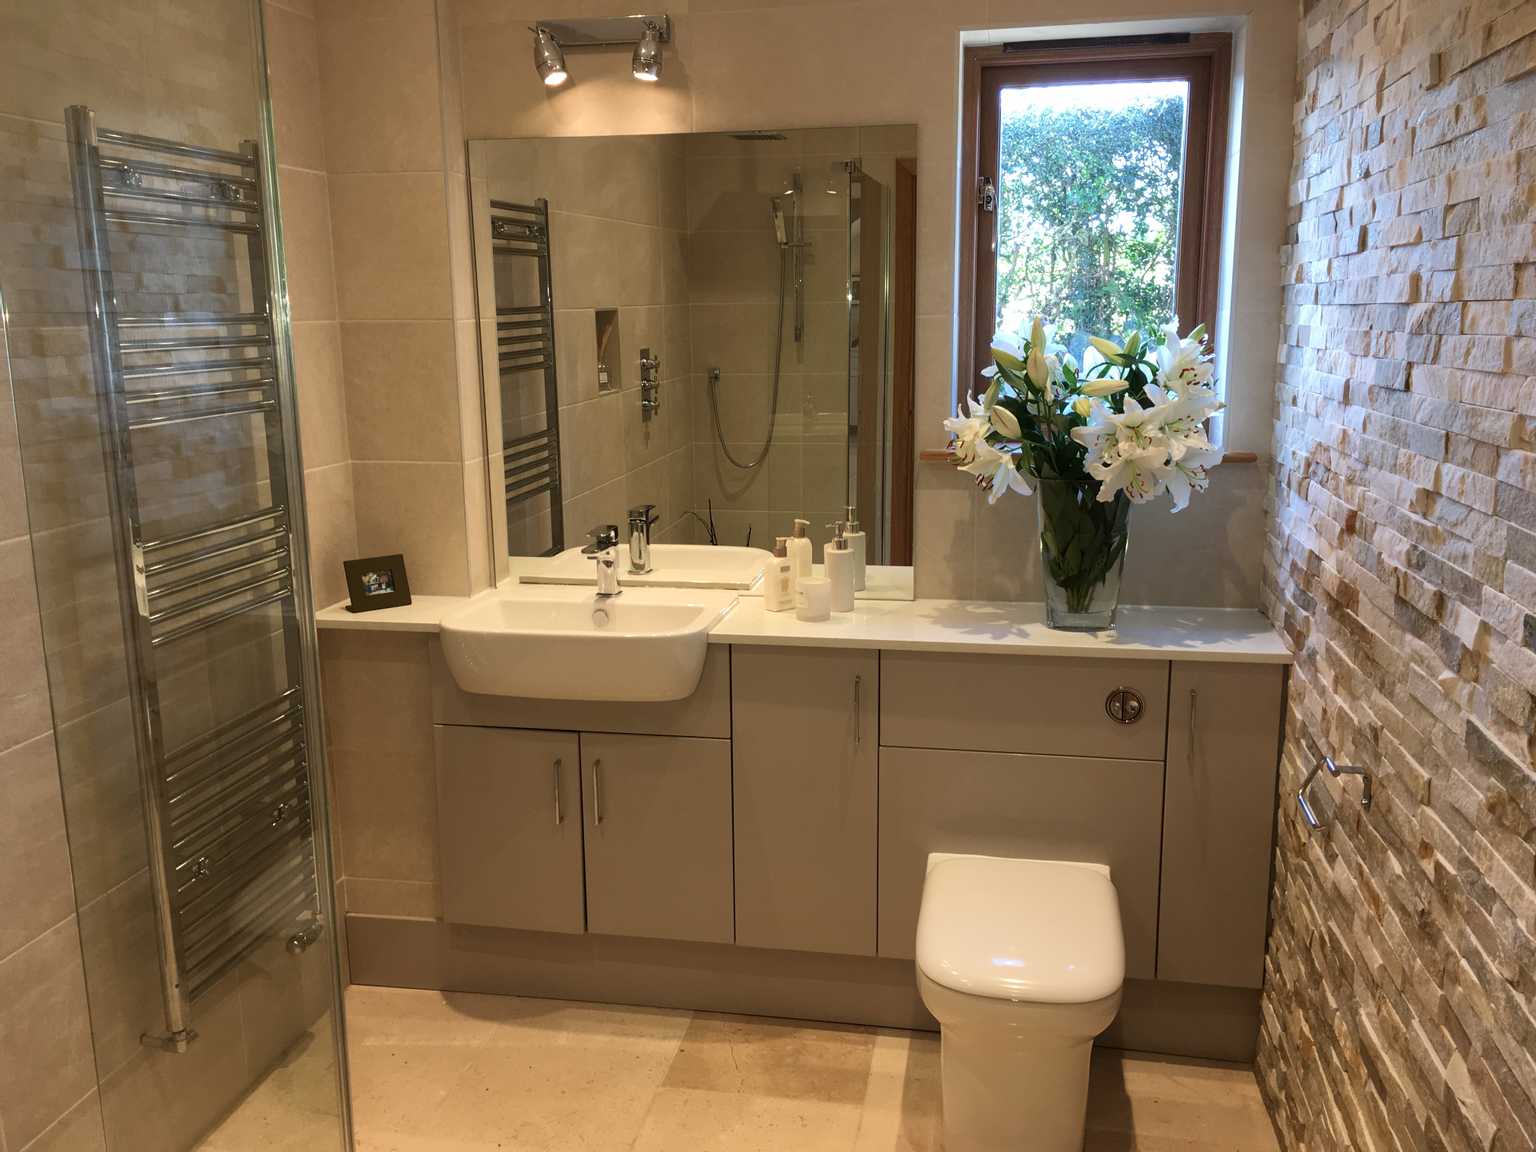 Bathroom Image with split face beige and cream tiles